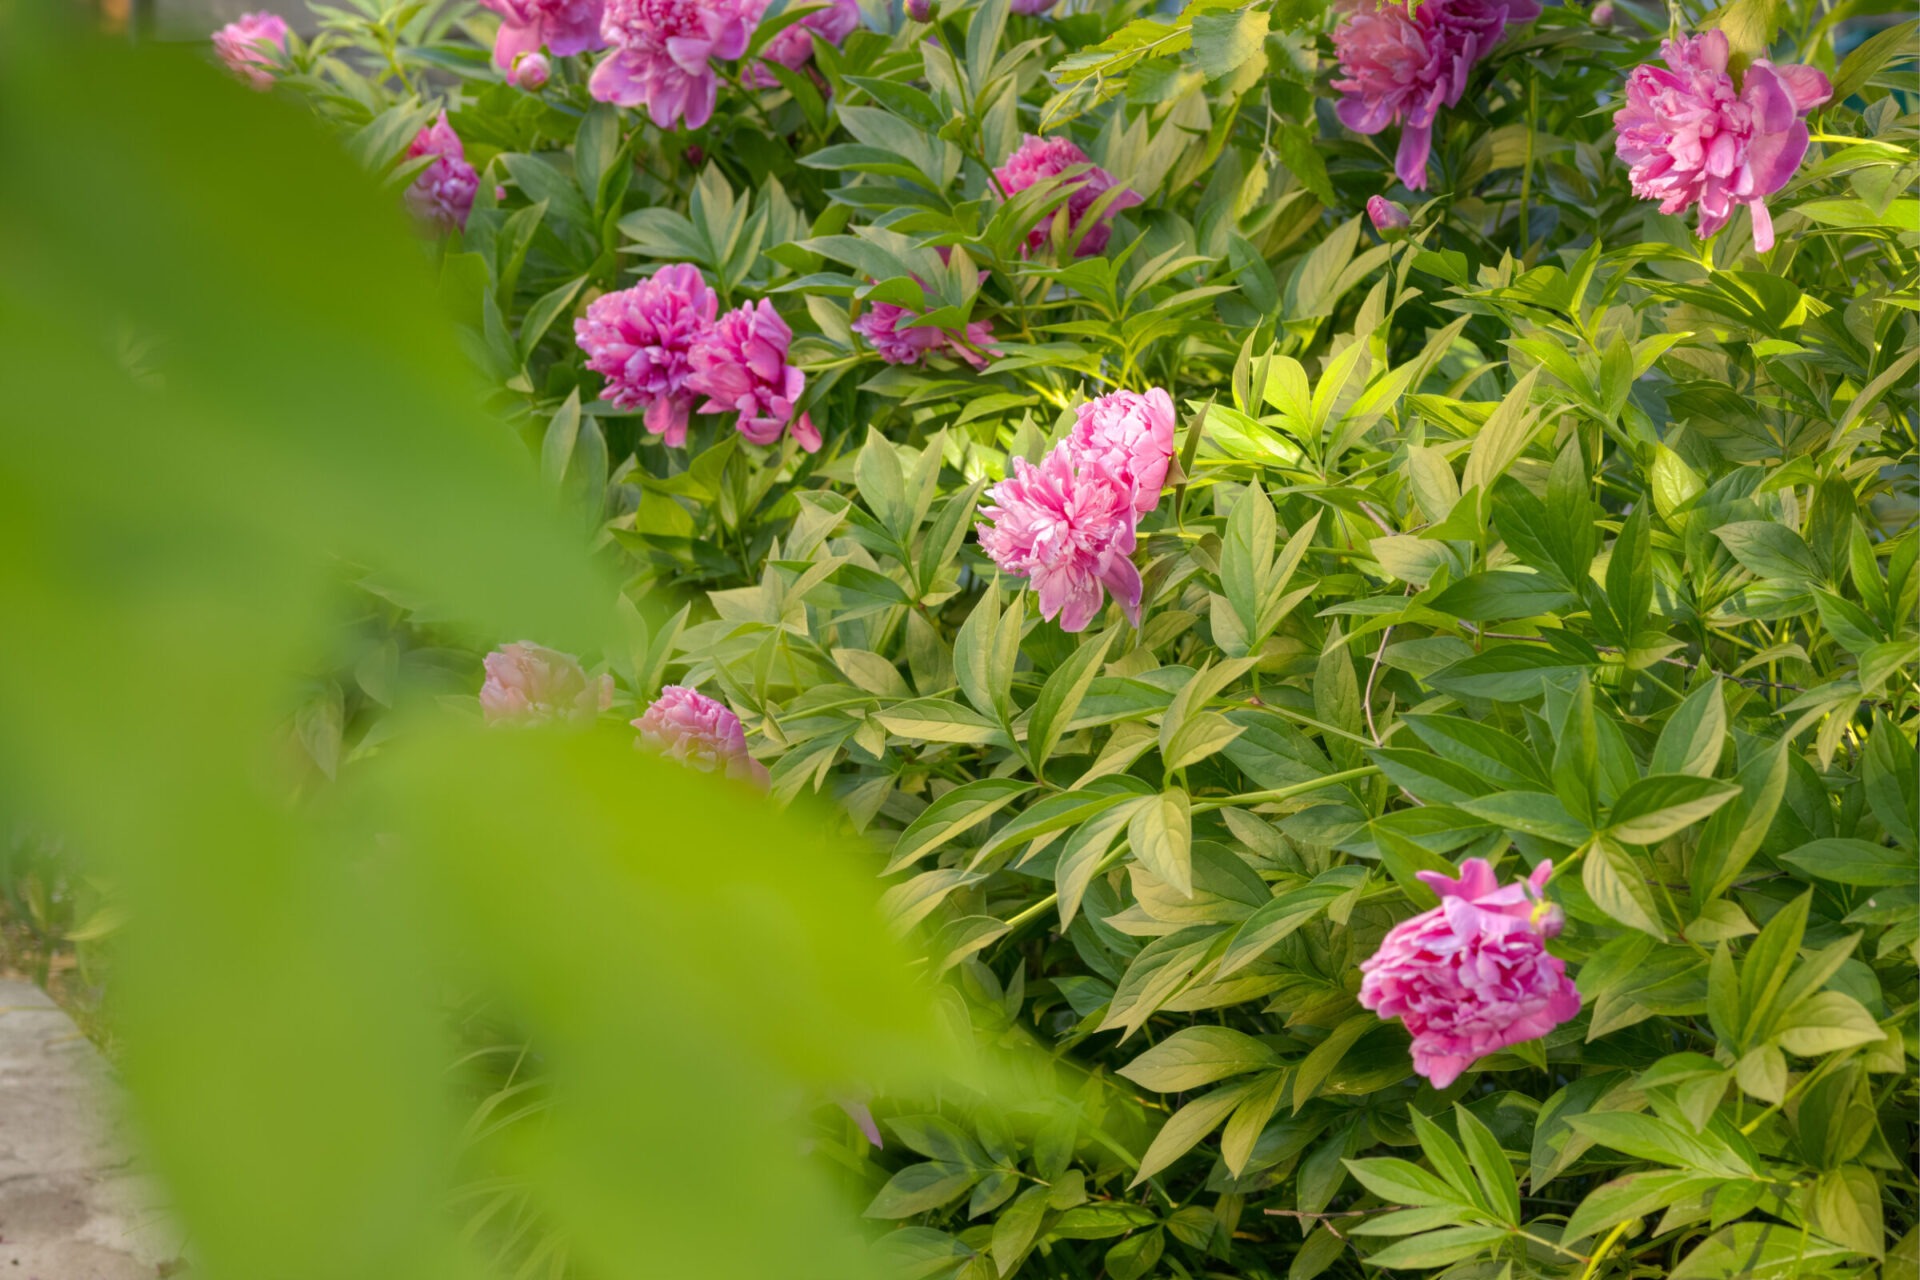 A lush garden with vibrant pink peonies nestled among green leaves, a blur of foliage in the foreground suggests a serene, hidden oasis.